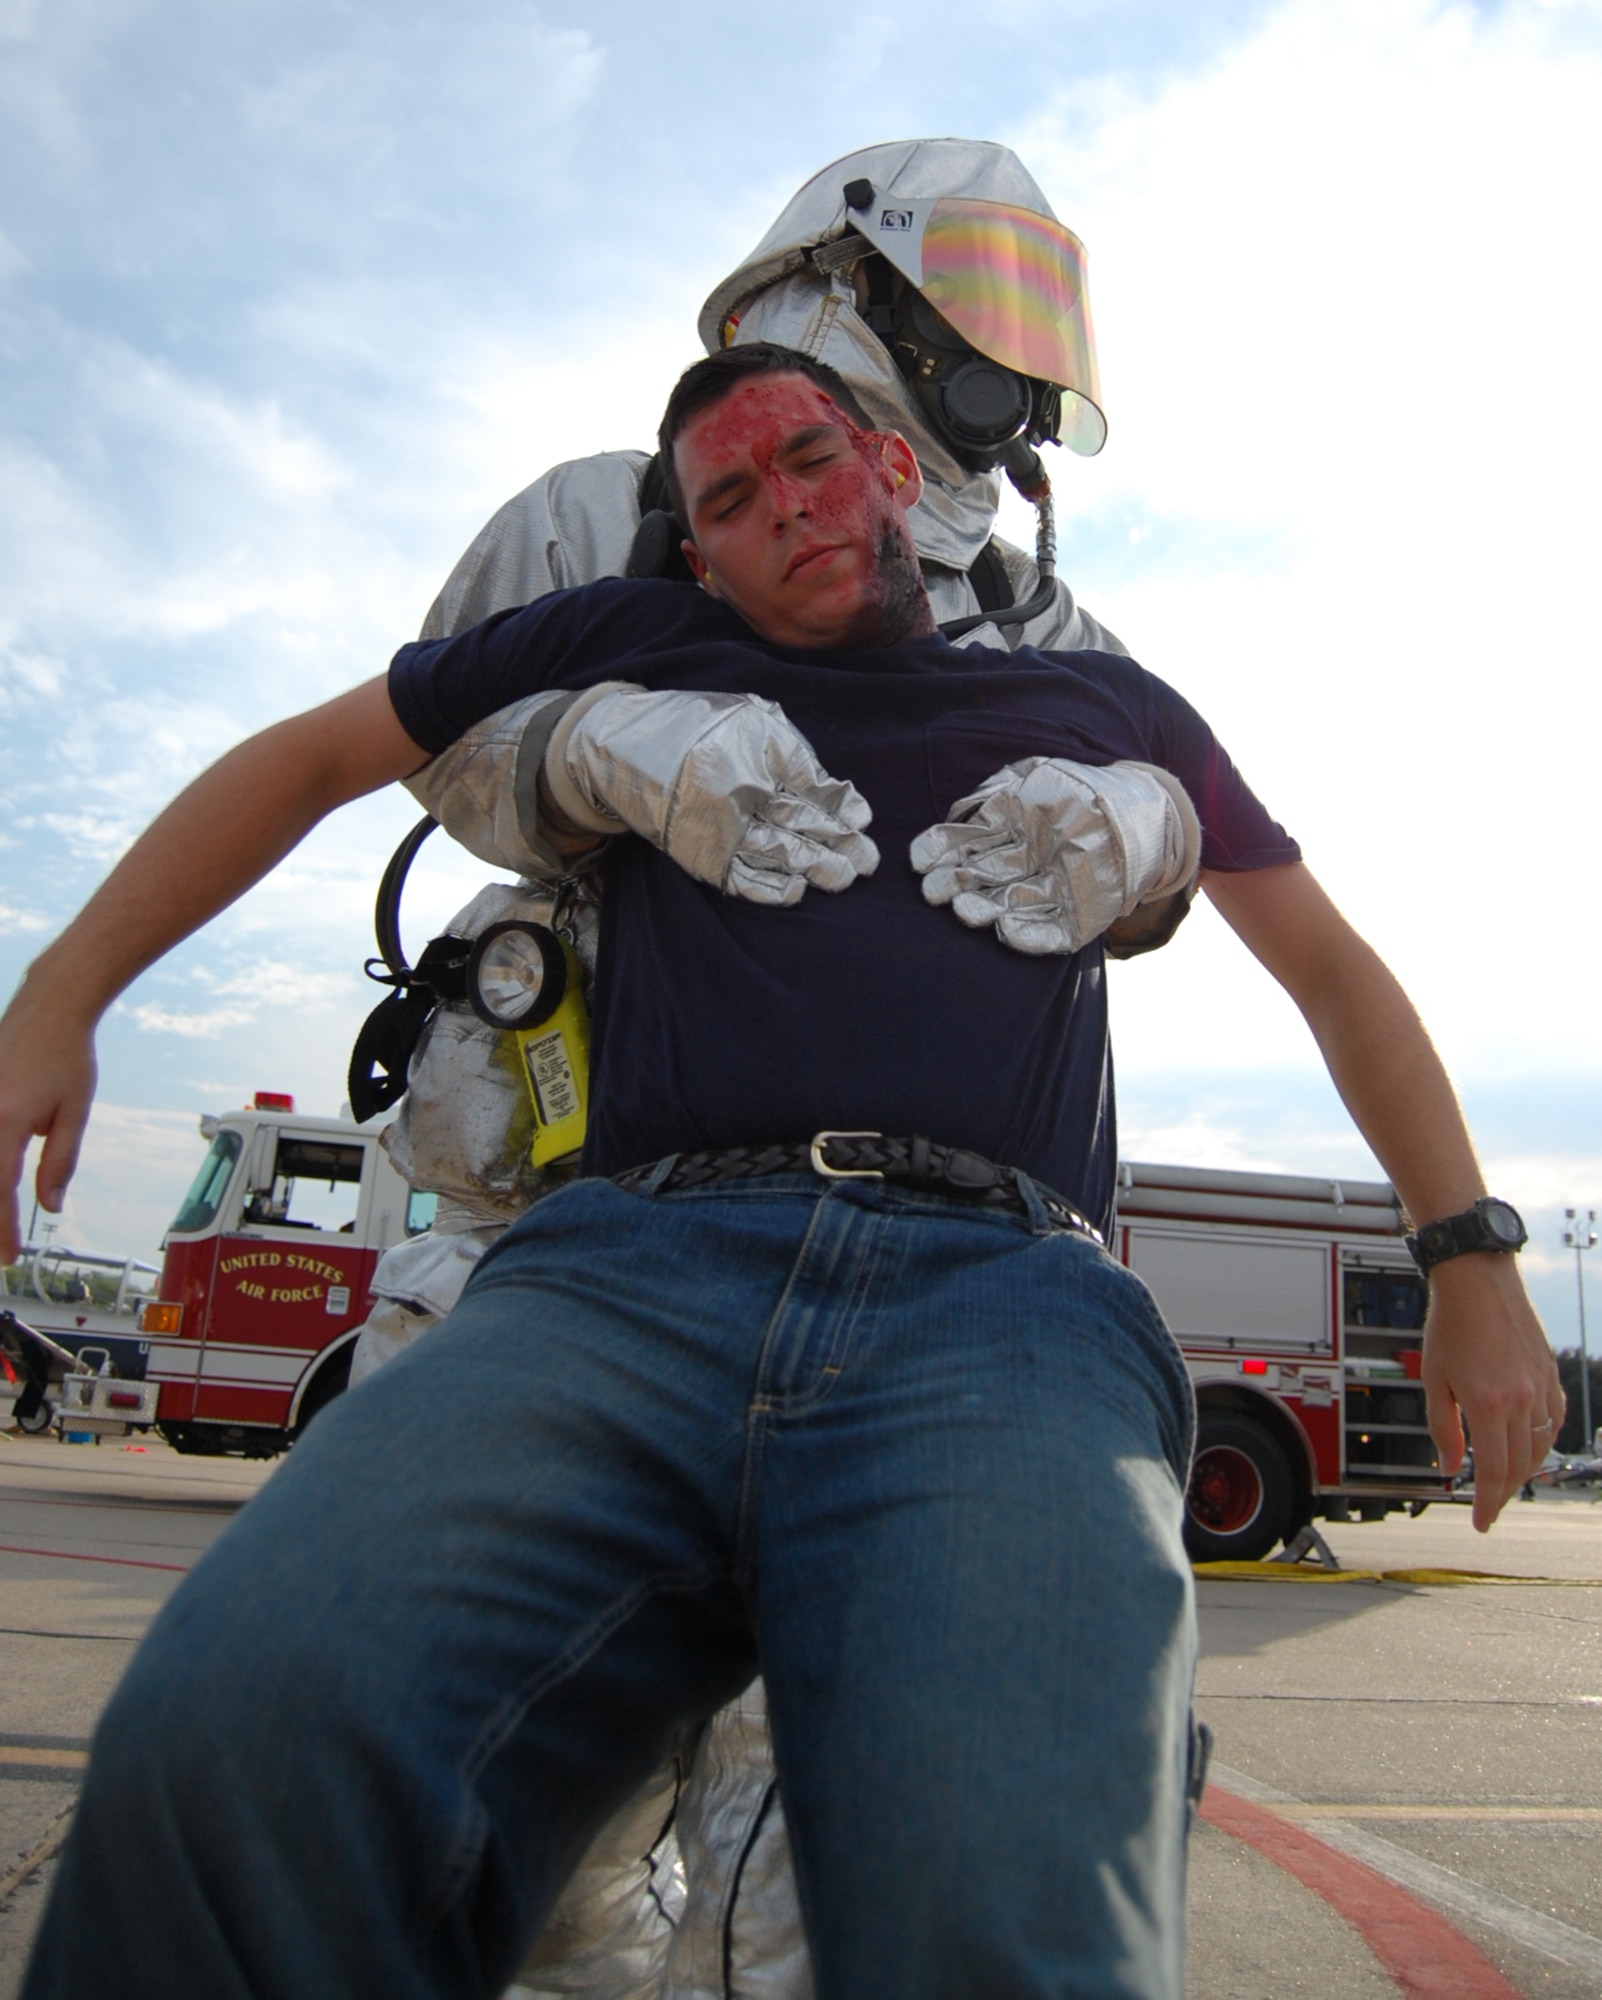 LAUGHLIN AIR FORCE BASE, Texas – A firefighter from the 47th Installation Support Squadron drags the limp body of a simulated explosion victim during an exercise on the flight line here Sept. 24.  The exercise involved several victims made up with detailed burns and other wounds, called moulage, which assists responders in identifying simulated injuries.  (U.S. Air Force photo by Staff Sgt Austin M. May)